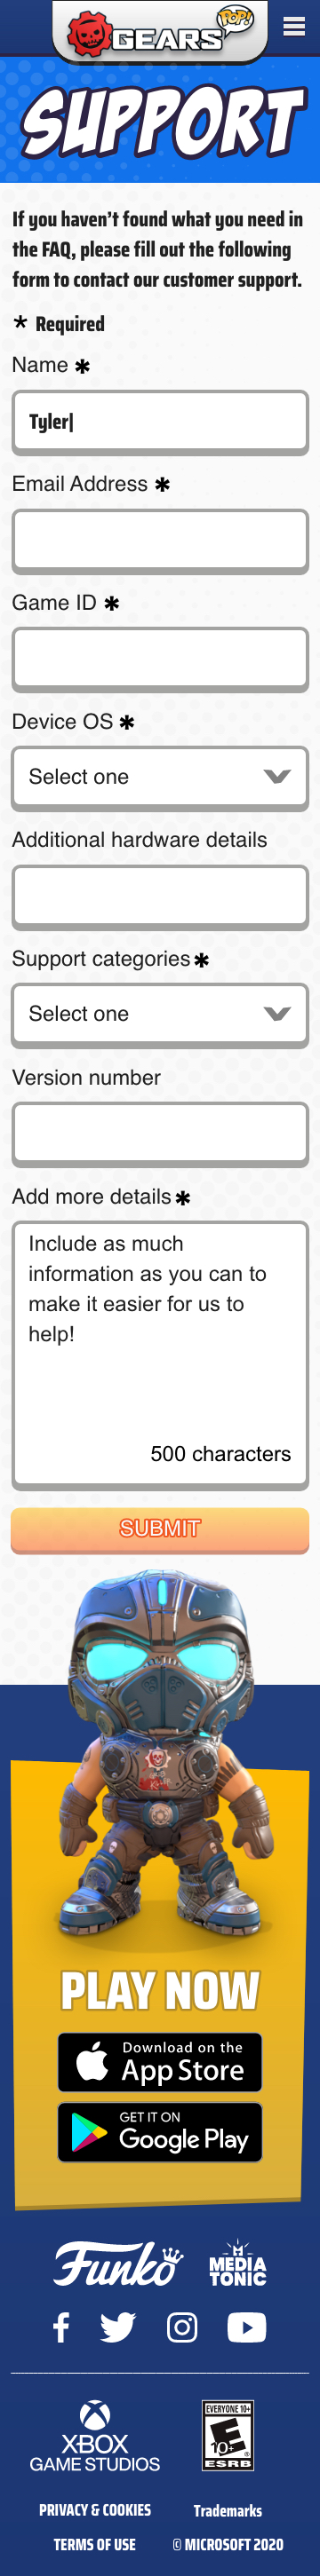  Gears POP! on mobile support form